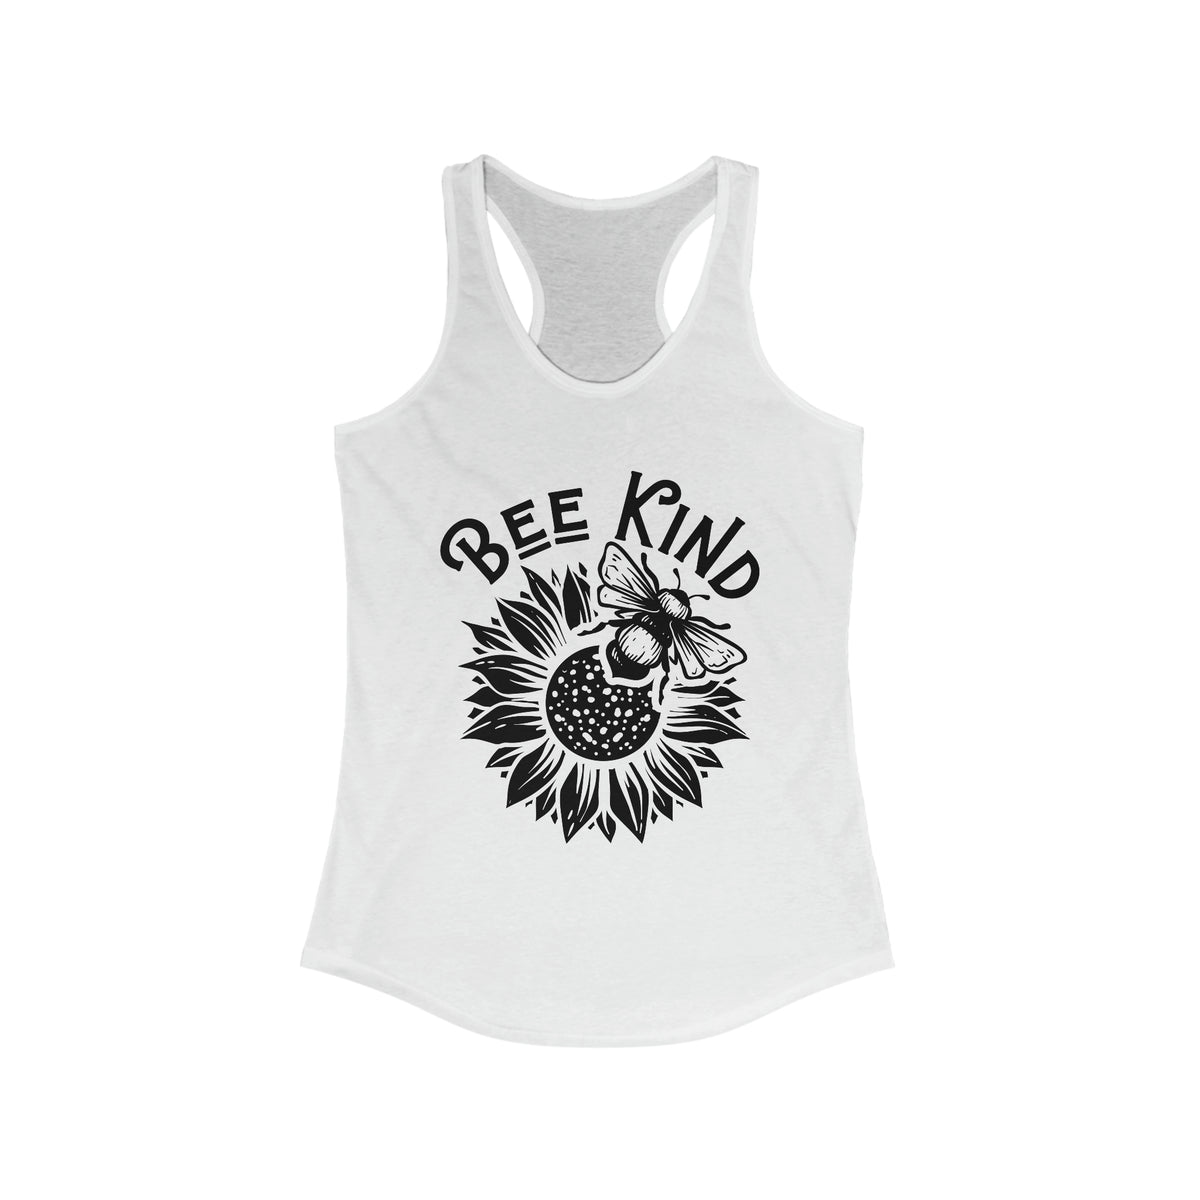 Be Kind Cute Bee Shirt | Bee Kind Sunflower Shirt | Nature Lover Gift for Her | Kindness Shirt | Women's Slim Fit Racerback Tank